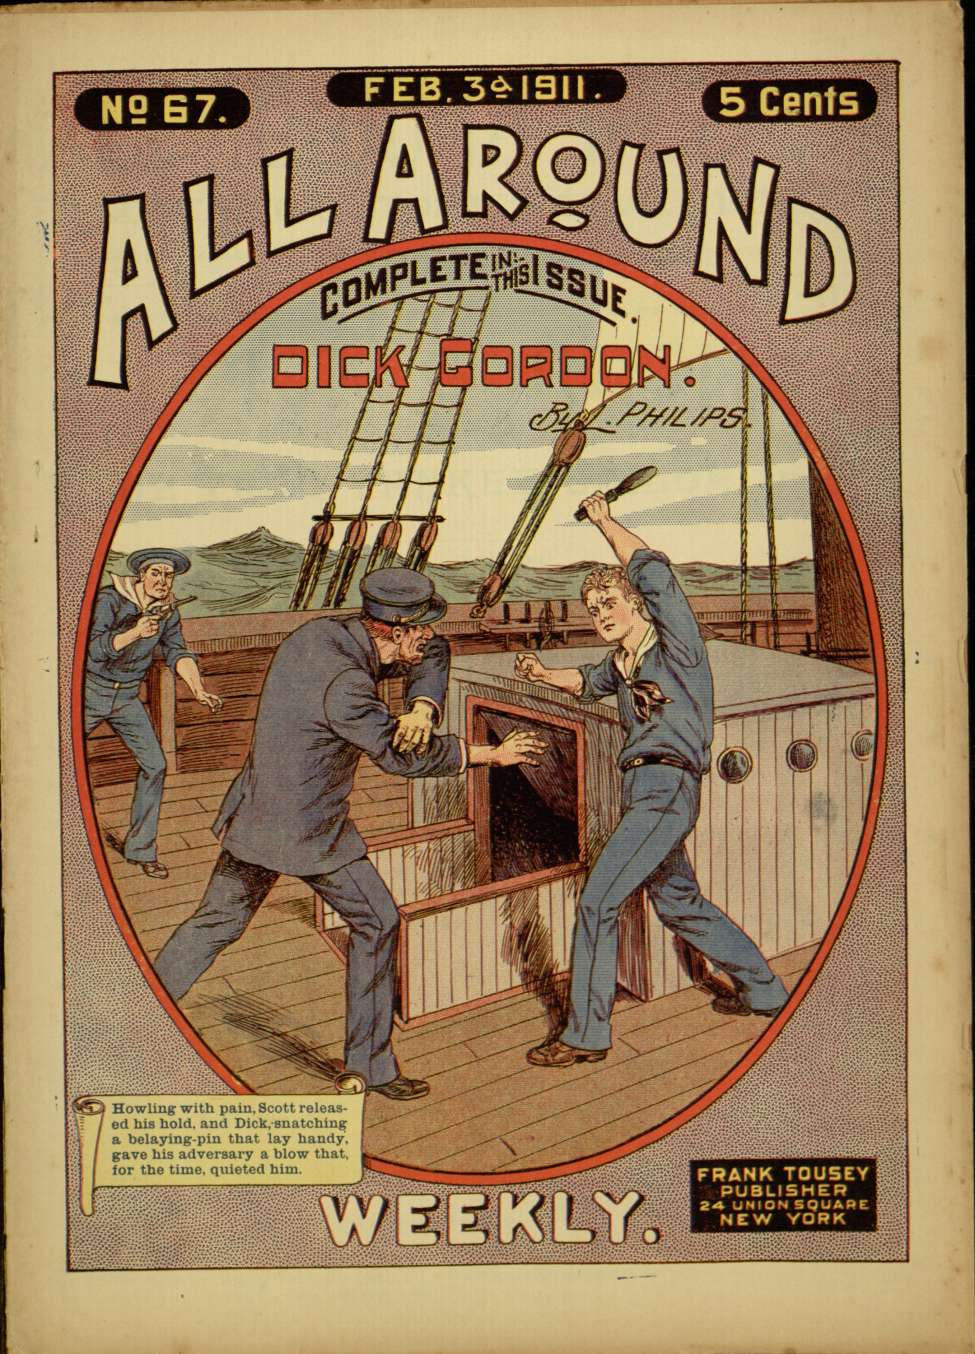 Book Cover For All Around Weekly 67 - Dick Gordon